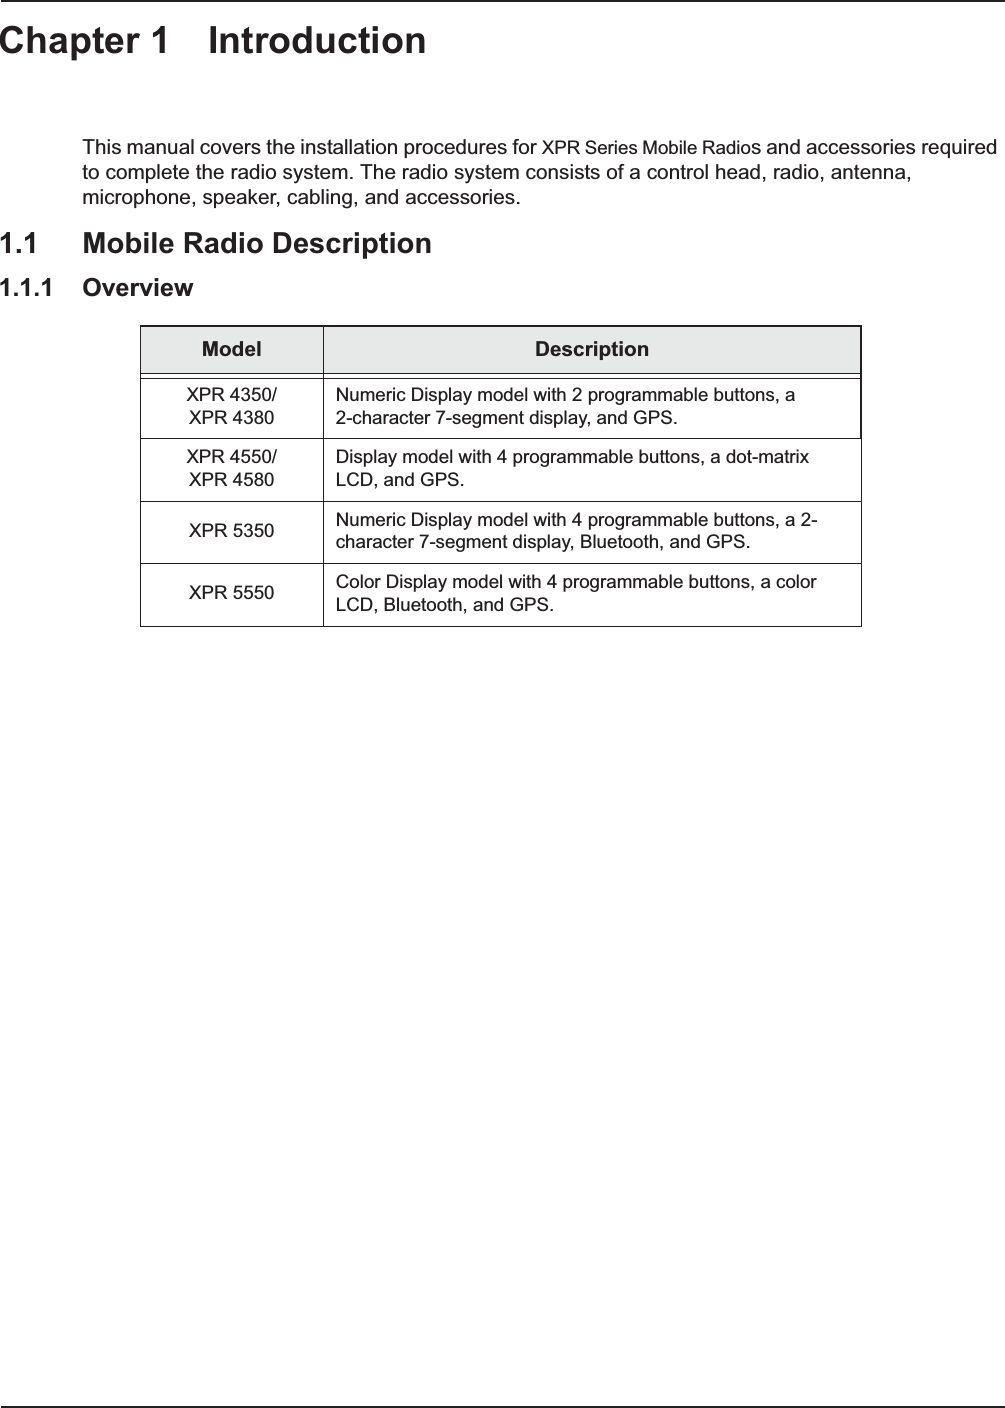 Chapter 1 IntroductionThis manual covers the installation procedures for XPR Series Mobile Radios and accessories required to complete the radio system. The radio system consists of a control head, radio, antenna, microphone, speaker, cabling, and accessories. 1.1 Mobile Radio Description1.1.1 Overview Model DescriptionXPR 4350/XPR 4380Numeric Display model with 2 programmable buttons, a 2-character 7-segment display, and GPS.XPR 4550/XPR 4580Display model with 4 programmable buttons, a dot-matrix LCD, and GPS.XPR 5350 Numeric Display model with 4 programmable buttons, a 2-character 7-segment display, Bluetooth, and GPS.XPR 5550 Color Display model with 4 programmable buttons, a color LCD, Bluetooth, and GPS.